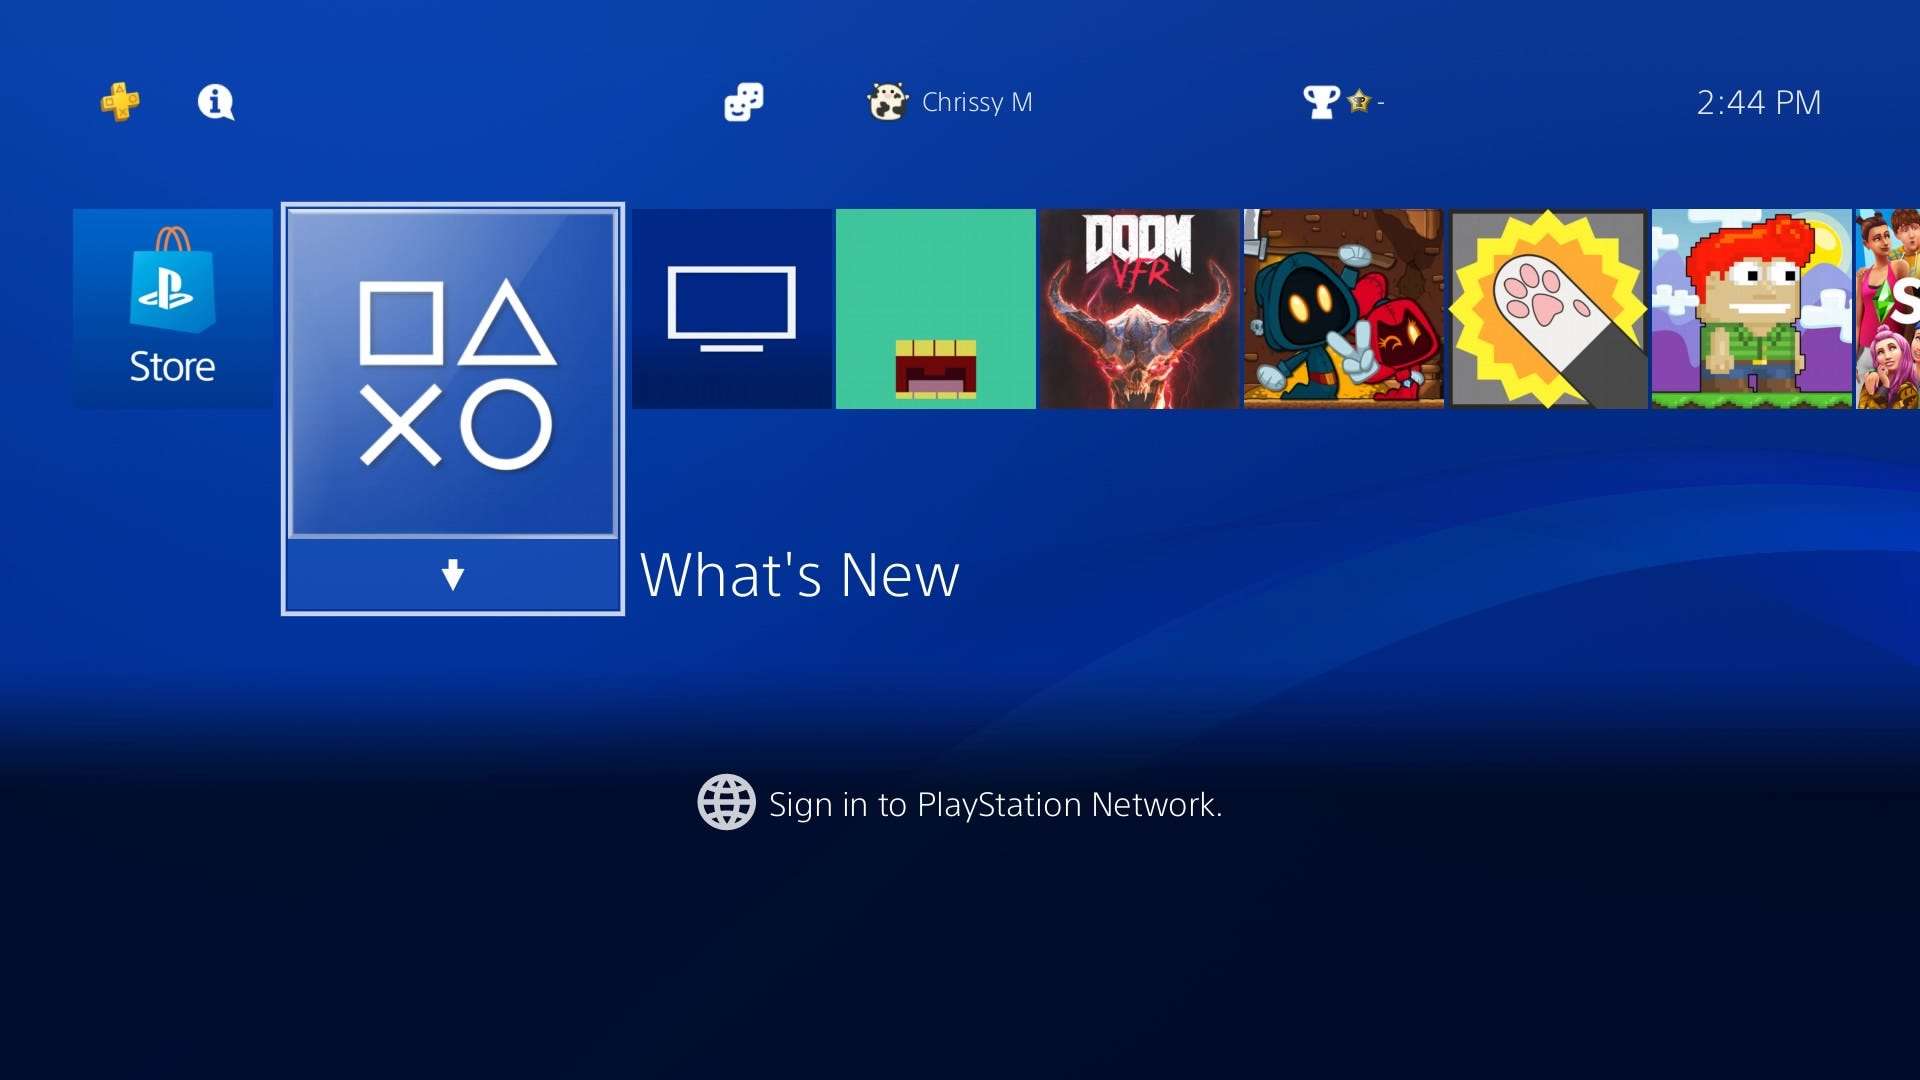 Set up PlayStation Network as an identity provider